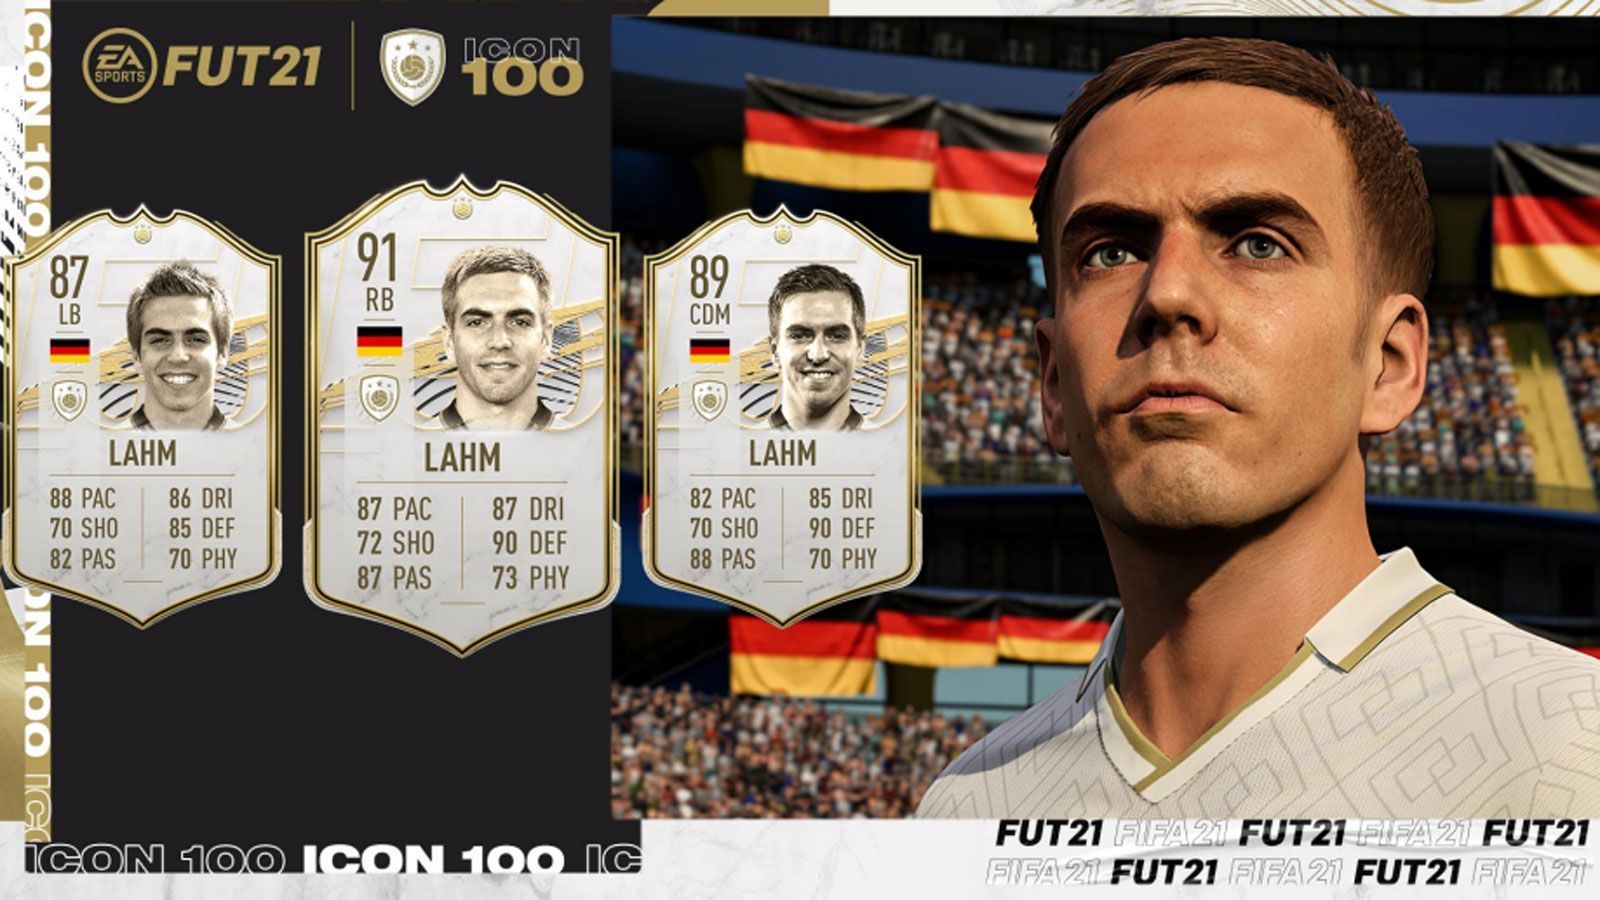 
                <strong>Phillip Lahm</strong><br>
                Position: Linksverteidigung/Defensives Mittelfeld/RechtsverteidigungBasis-Icon-Rating: 87Mid-Icon-Rating: 89Prime-Icon-Rating: 91
              